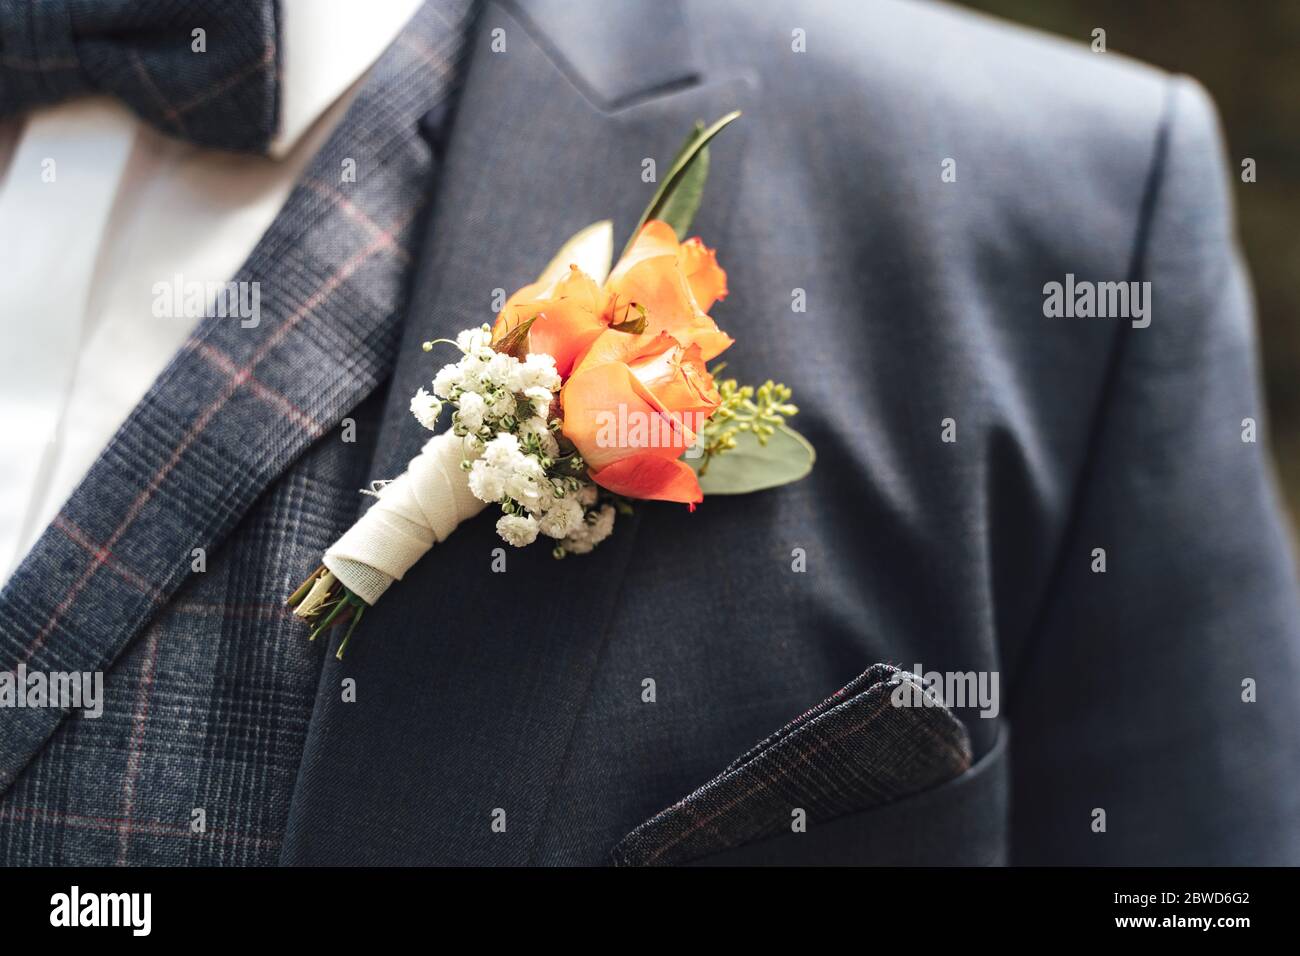 Close up of pink rose wedding boutonniere on groom's suit. Beautiful posy on lapel of jacket. Wedding day concept. Stock Photo